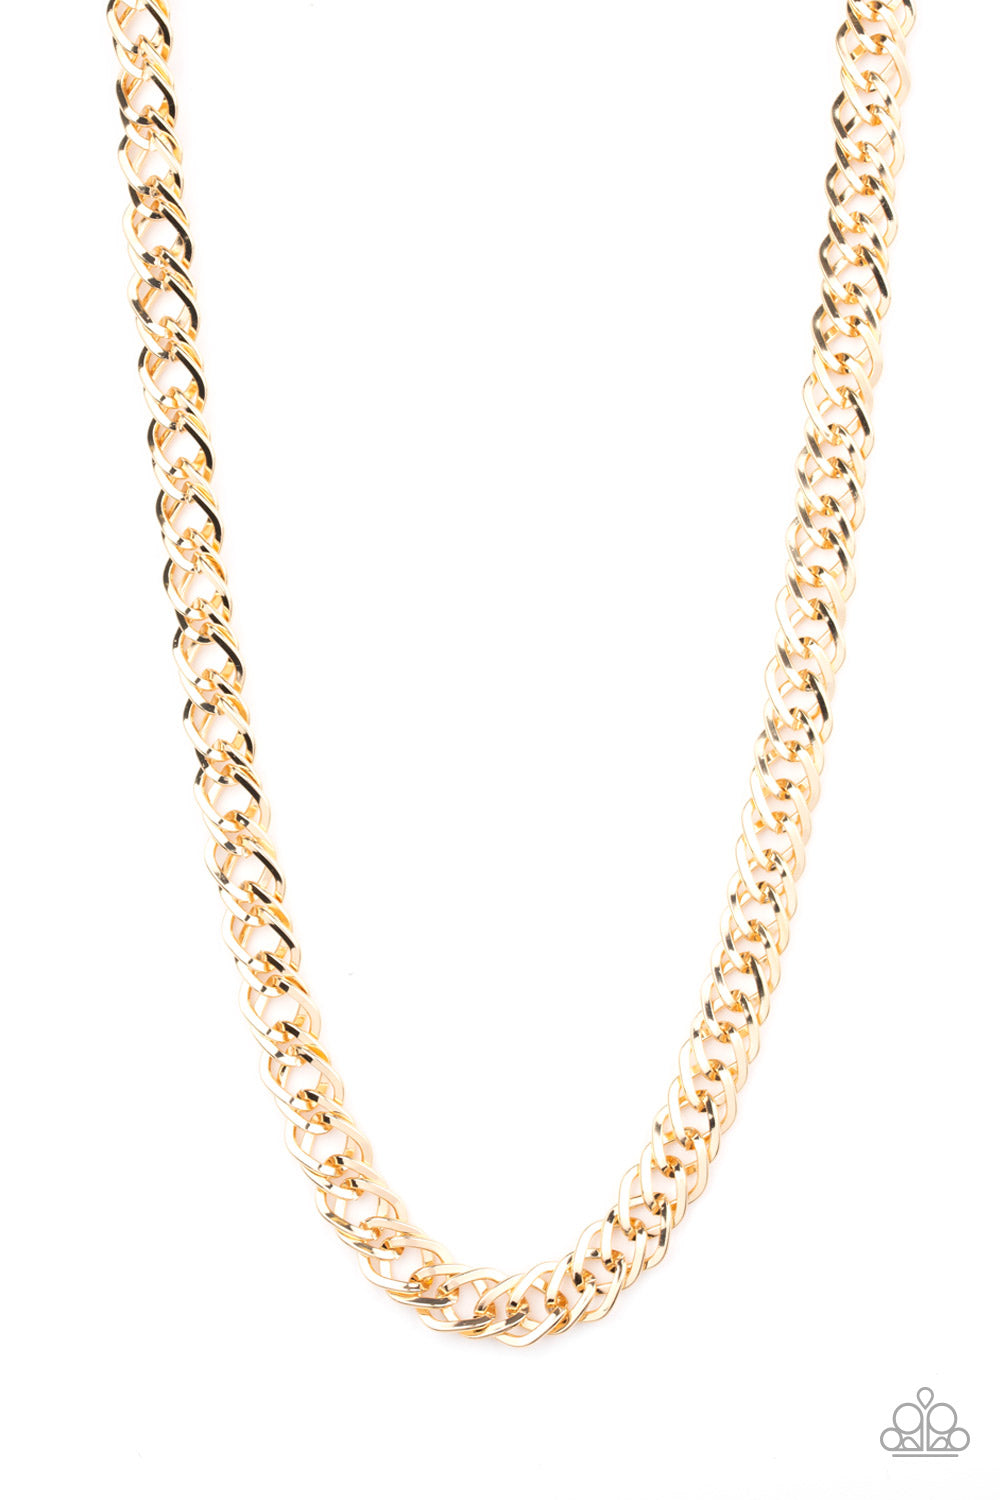 Paparazzi Accessories  - Undefeated #N839 Peg - Gold Urban Necklace